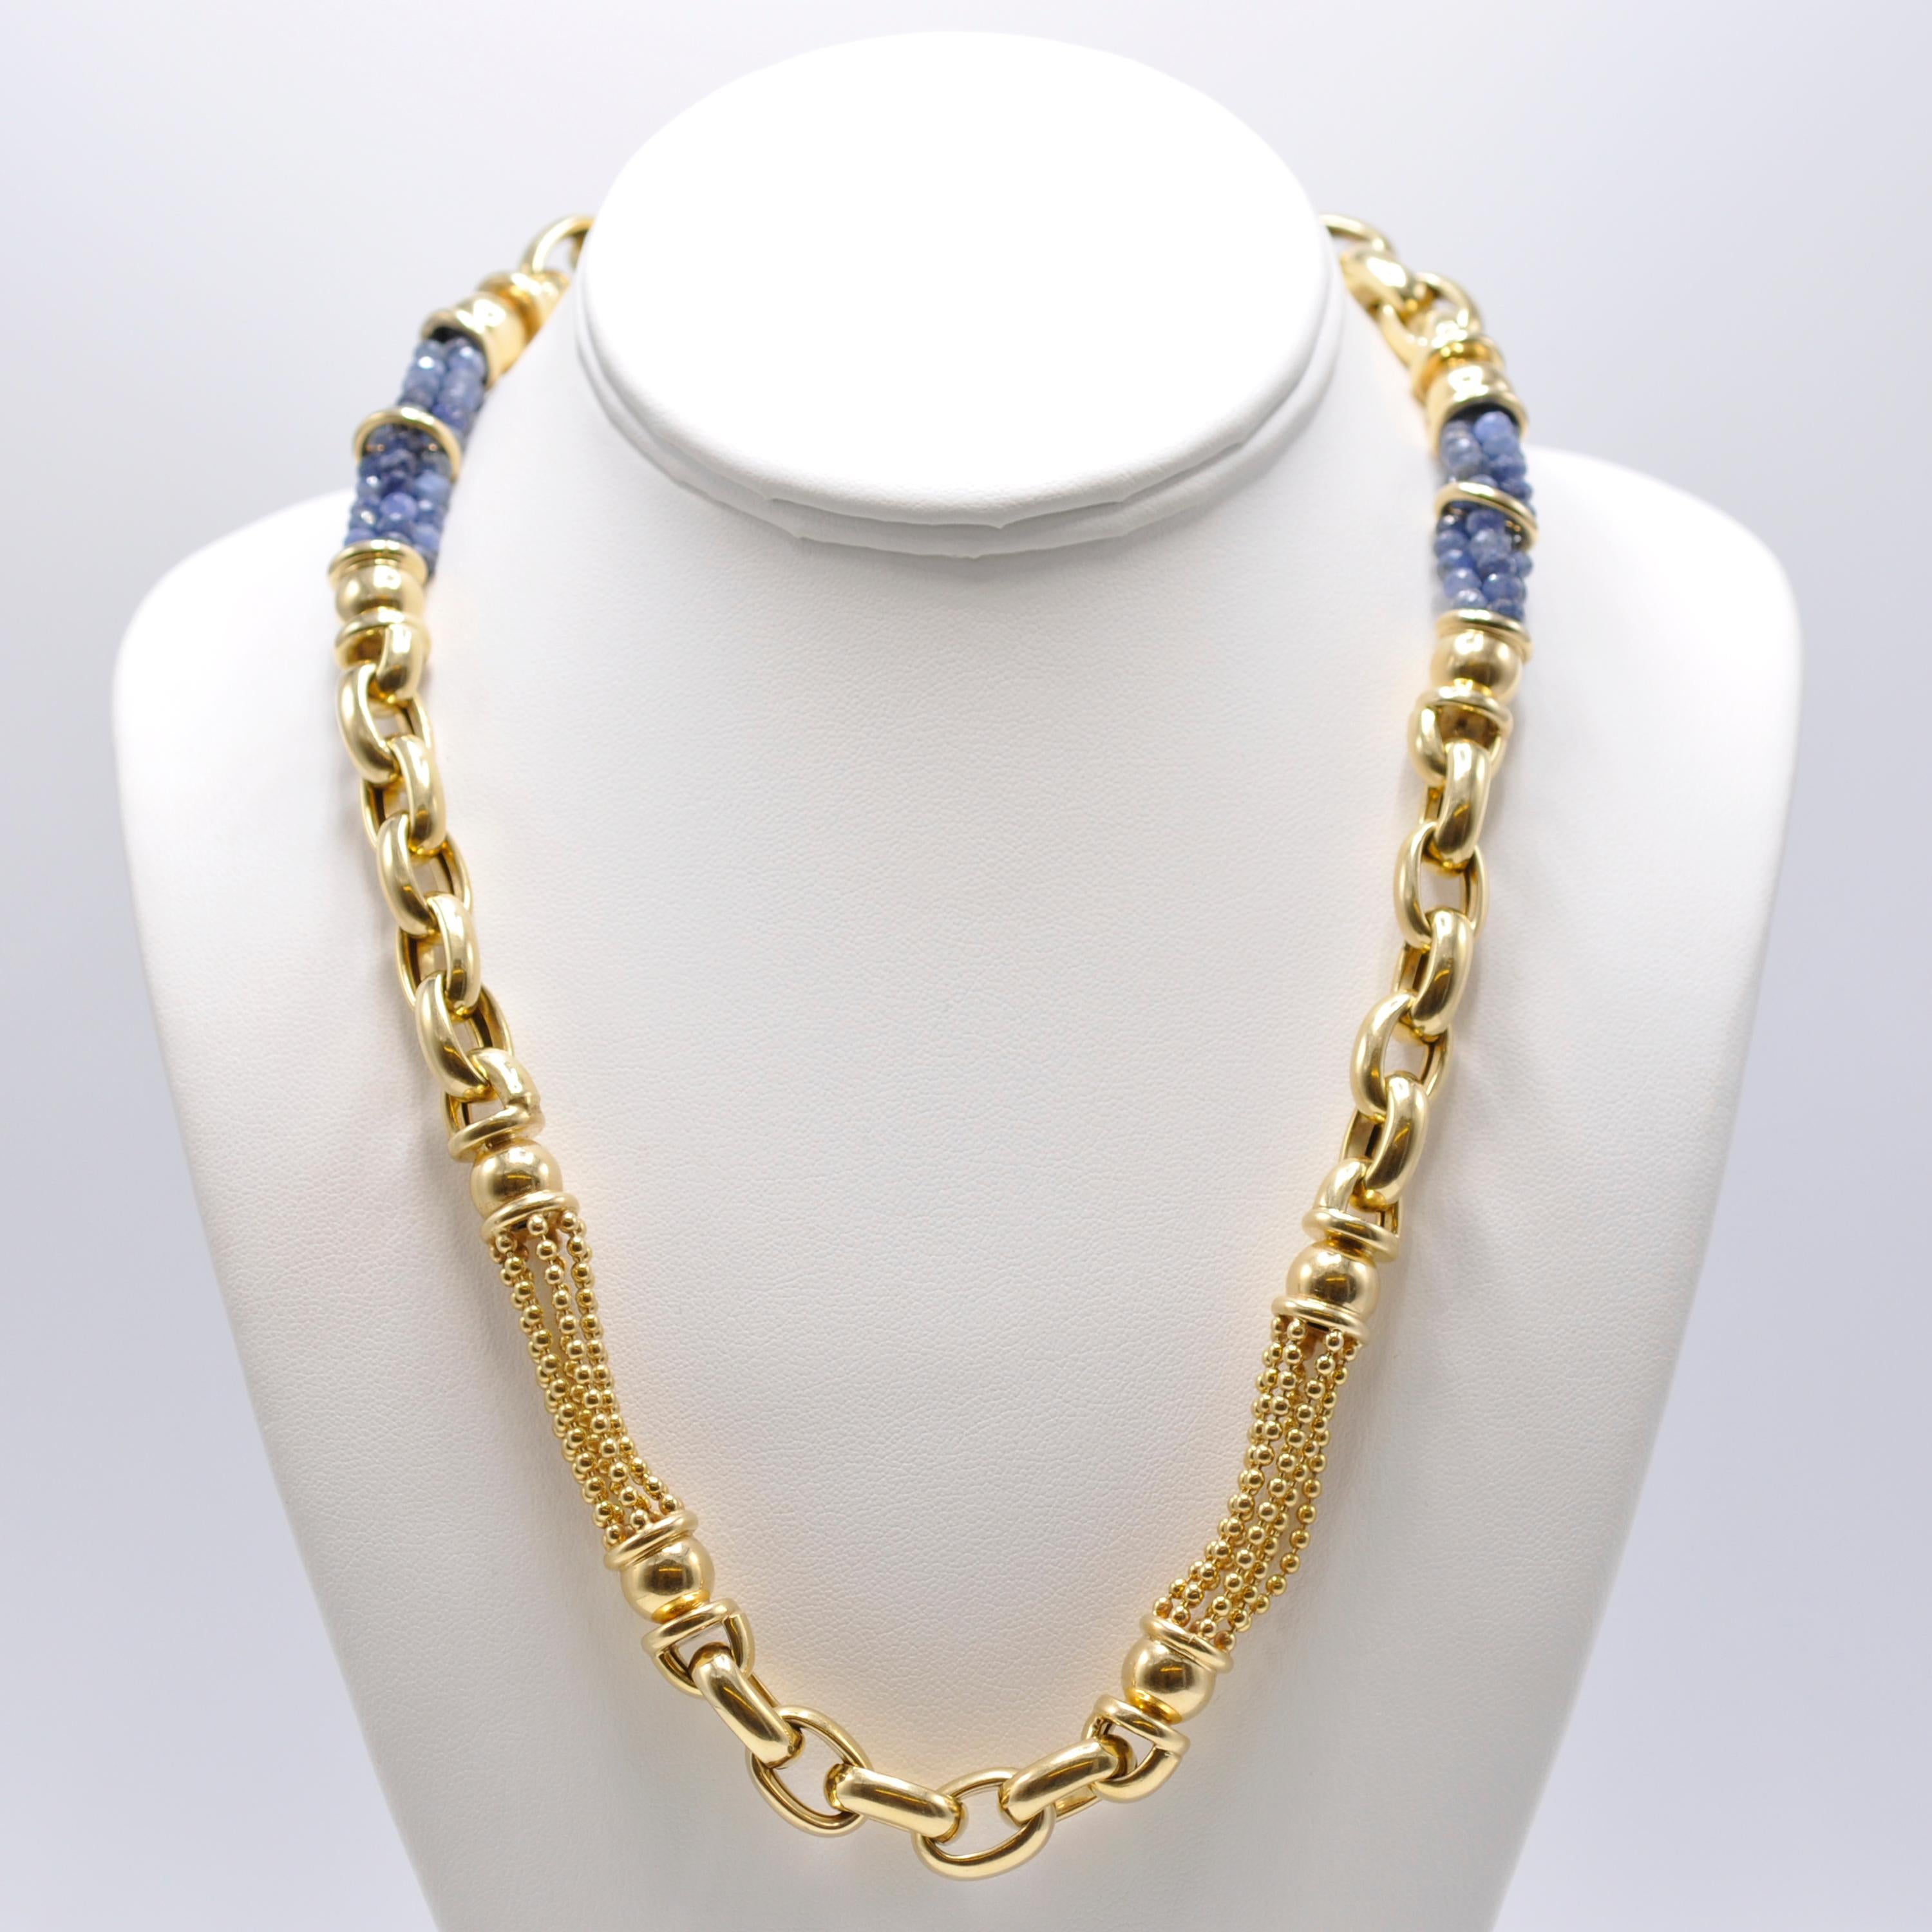 This strong 14 Karat yellow gold chain link necklace is accented with 2 large stations of 40 sapphires each. 

Wear it with your business suits for that extra boost of confidence. 

Stamped 